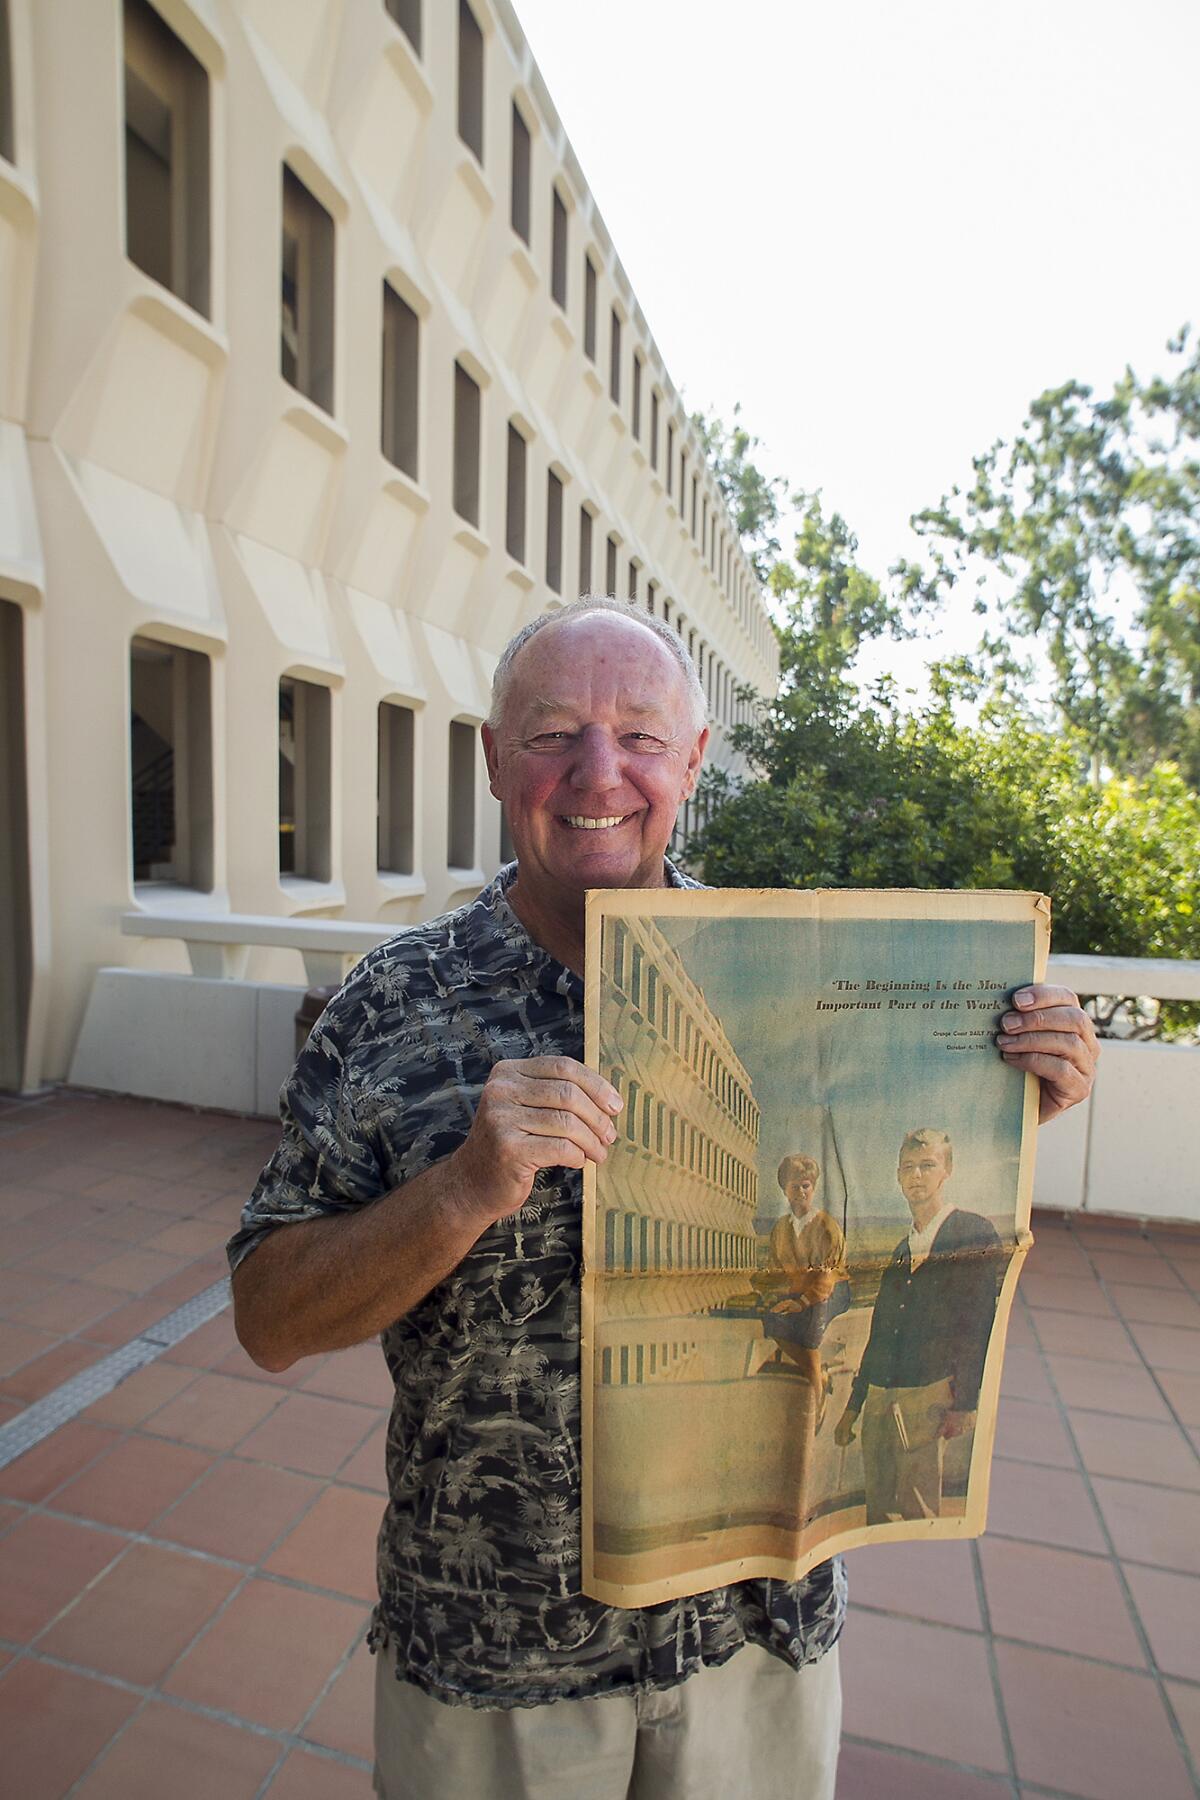 Mike Grayston holds a copy of the 1965 Daily Pilot that featured him on his first day at UCI when it opened.